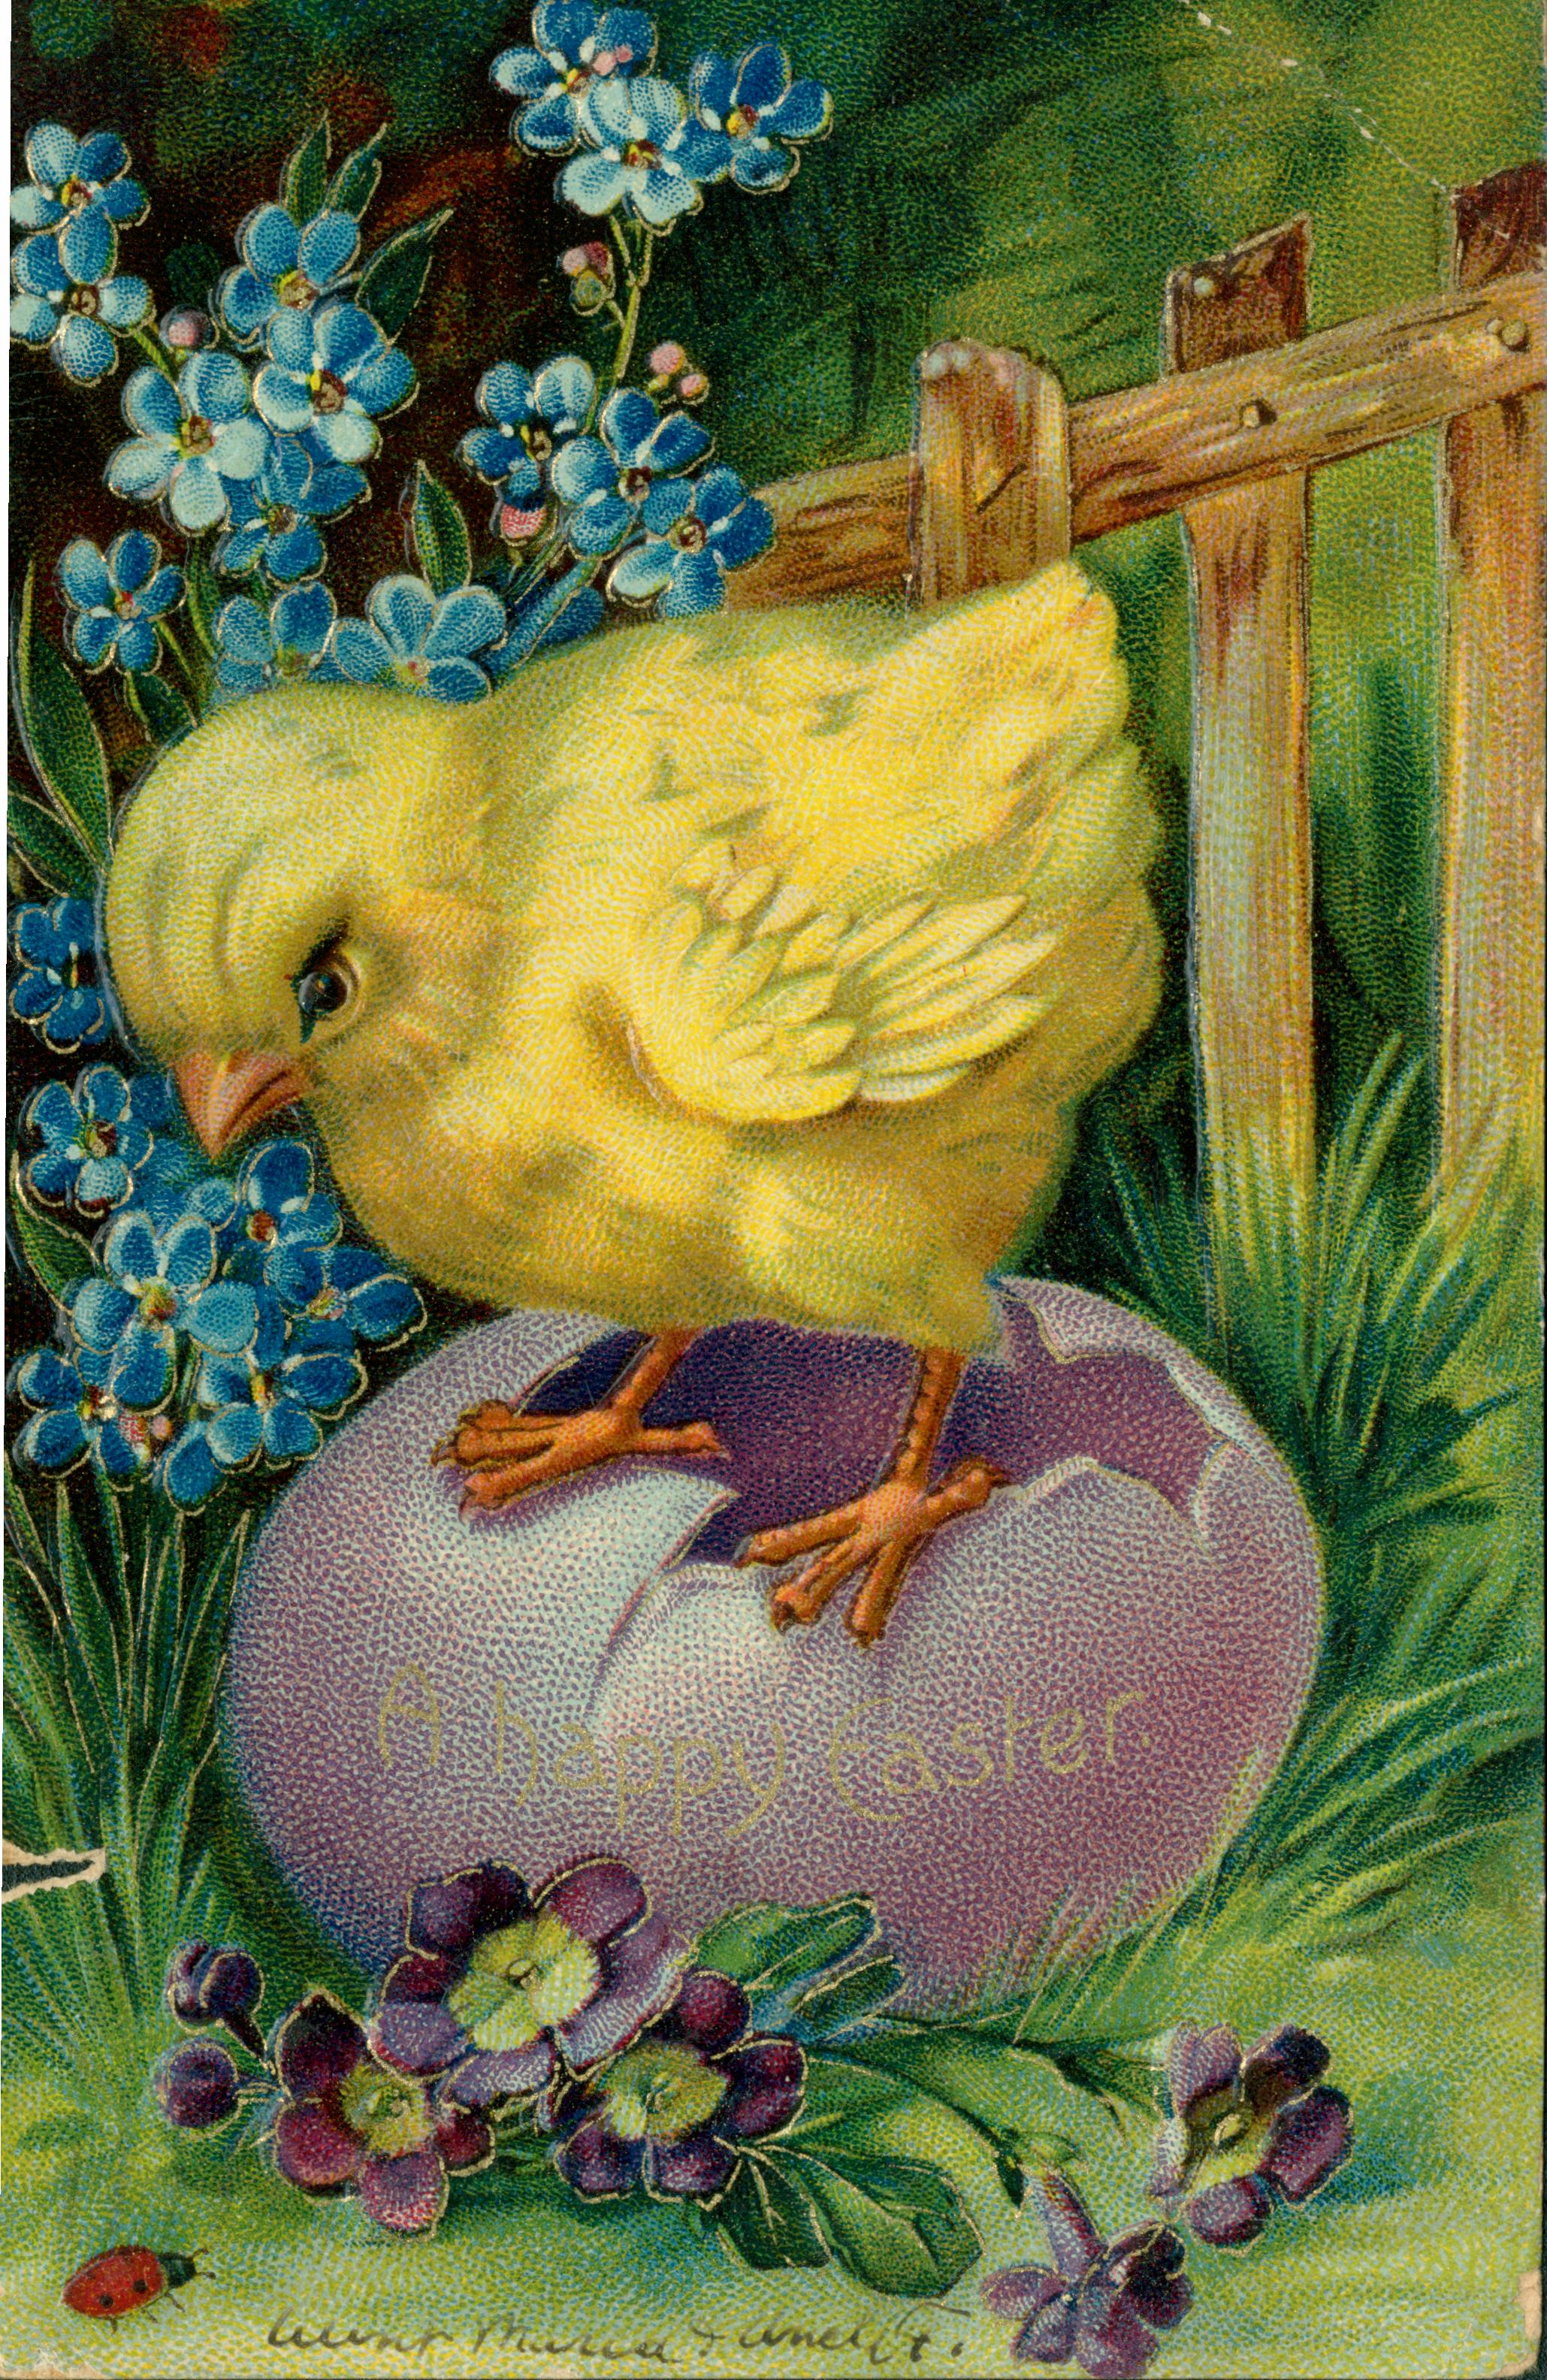 A chick standing on a hatched egg surrounded by flowers.